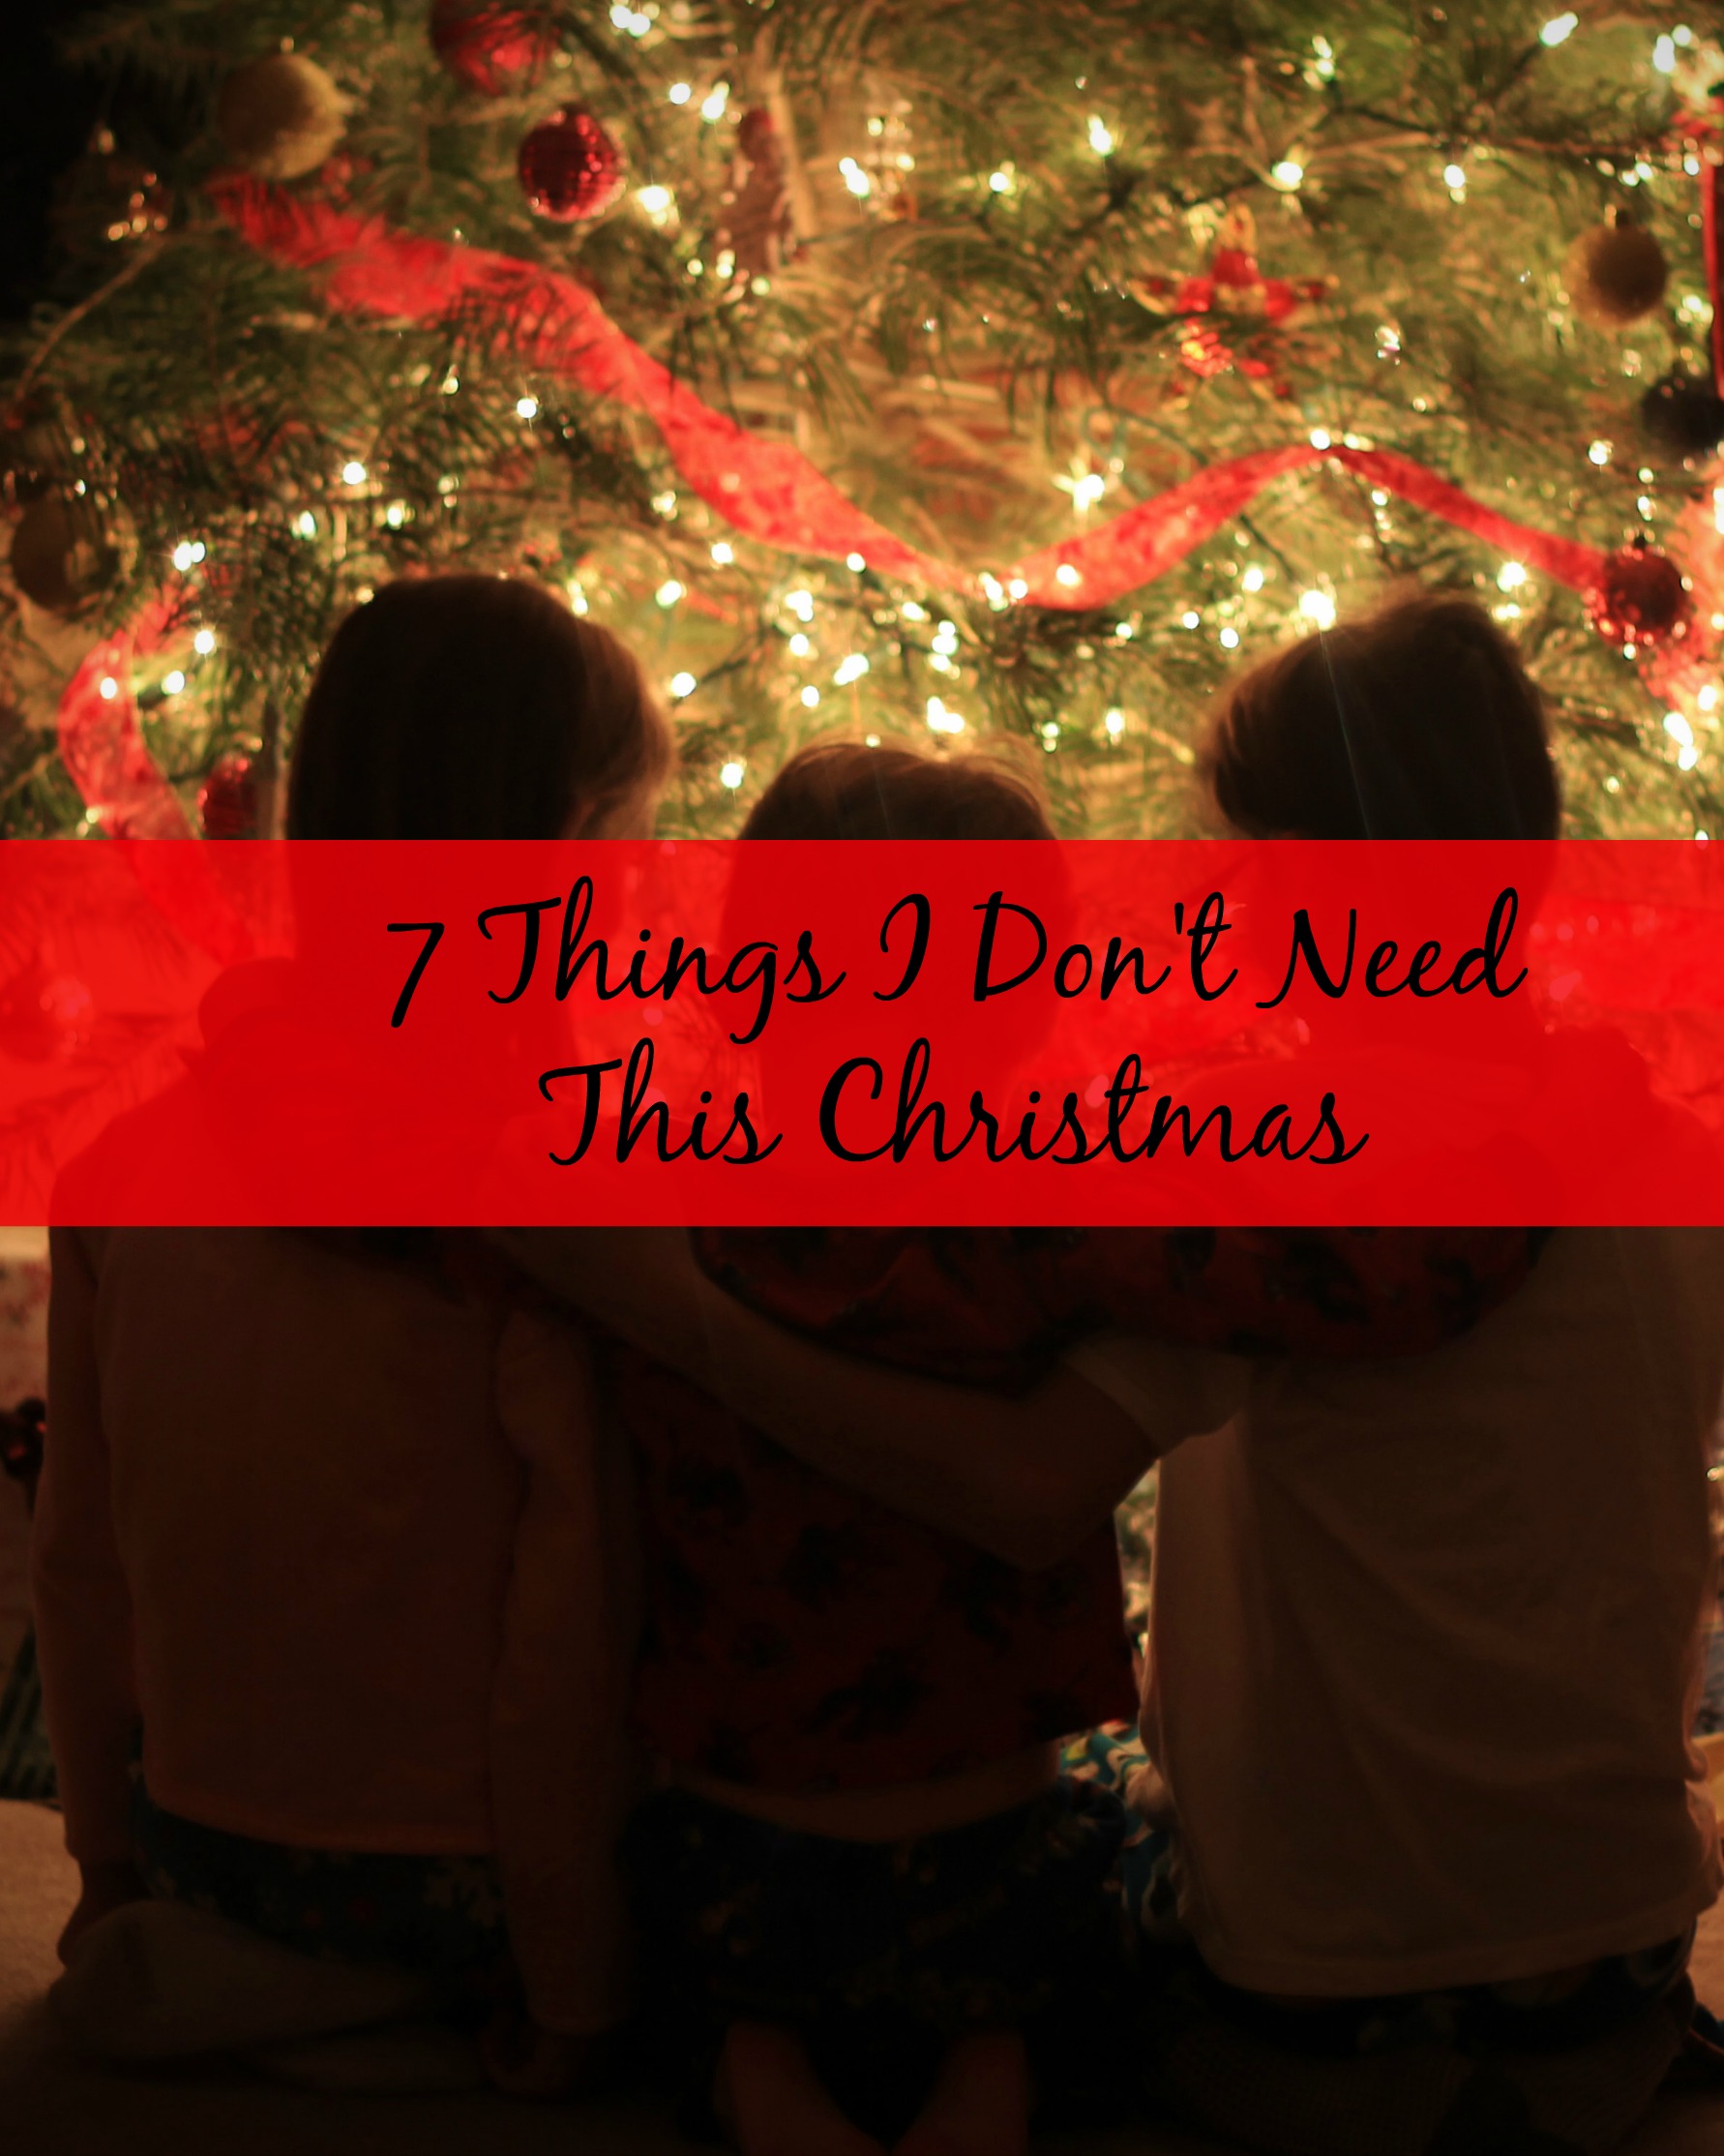 7 Things I Don’t Need This Christmas